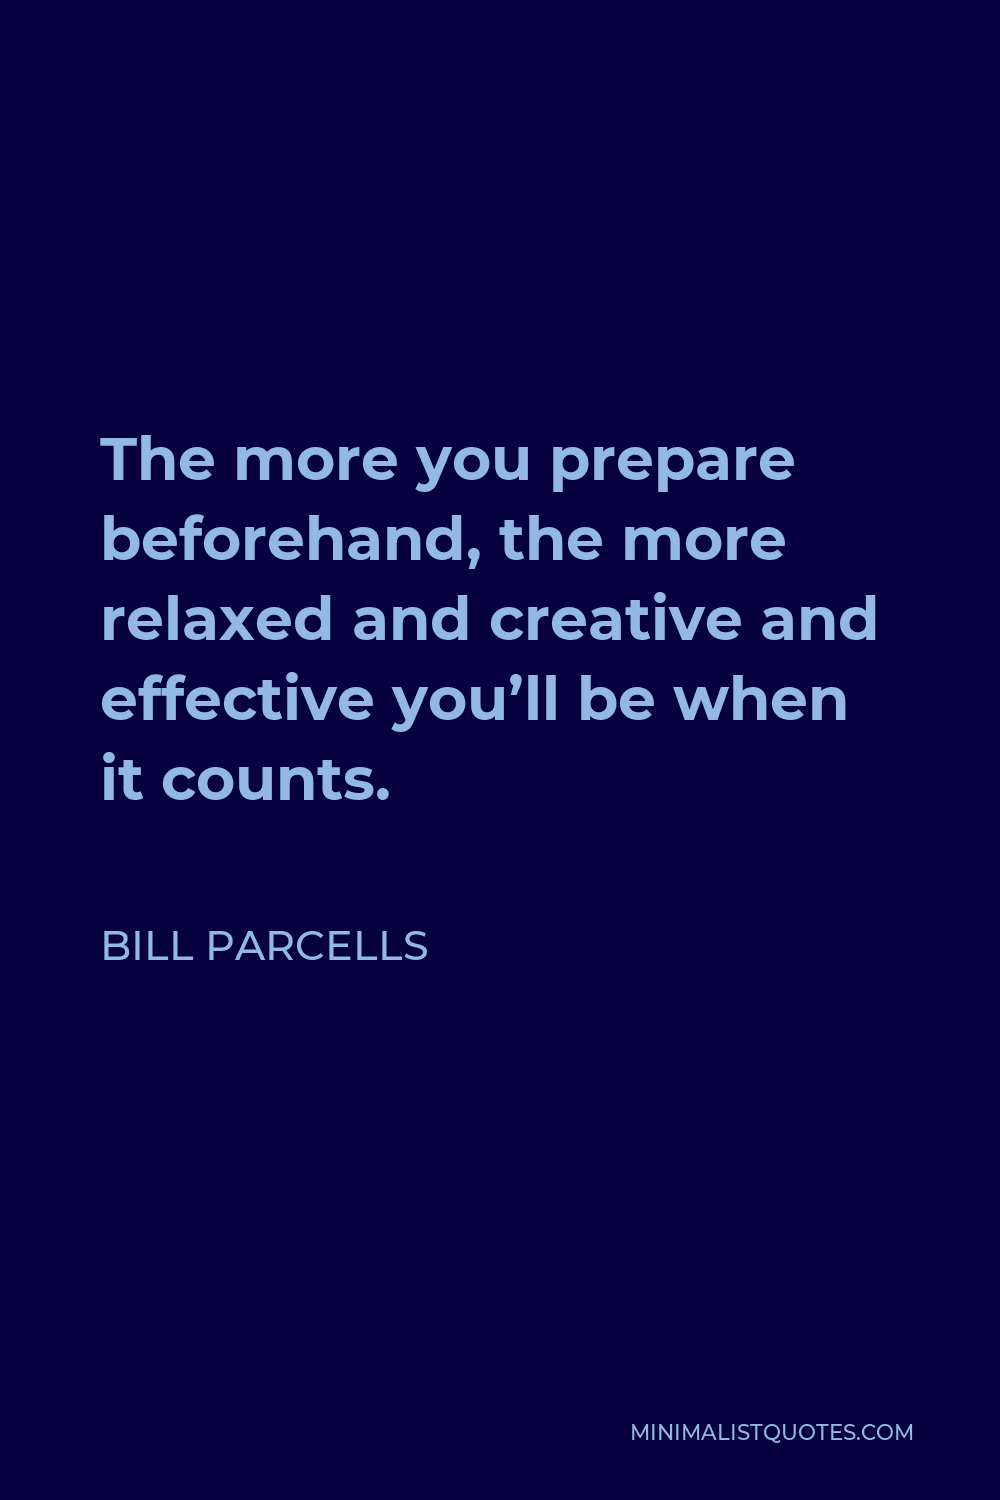 Bill Parcells Quote - The more you prepare beforehand, the more relaxed and creative and effective you’ll be when it counts.